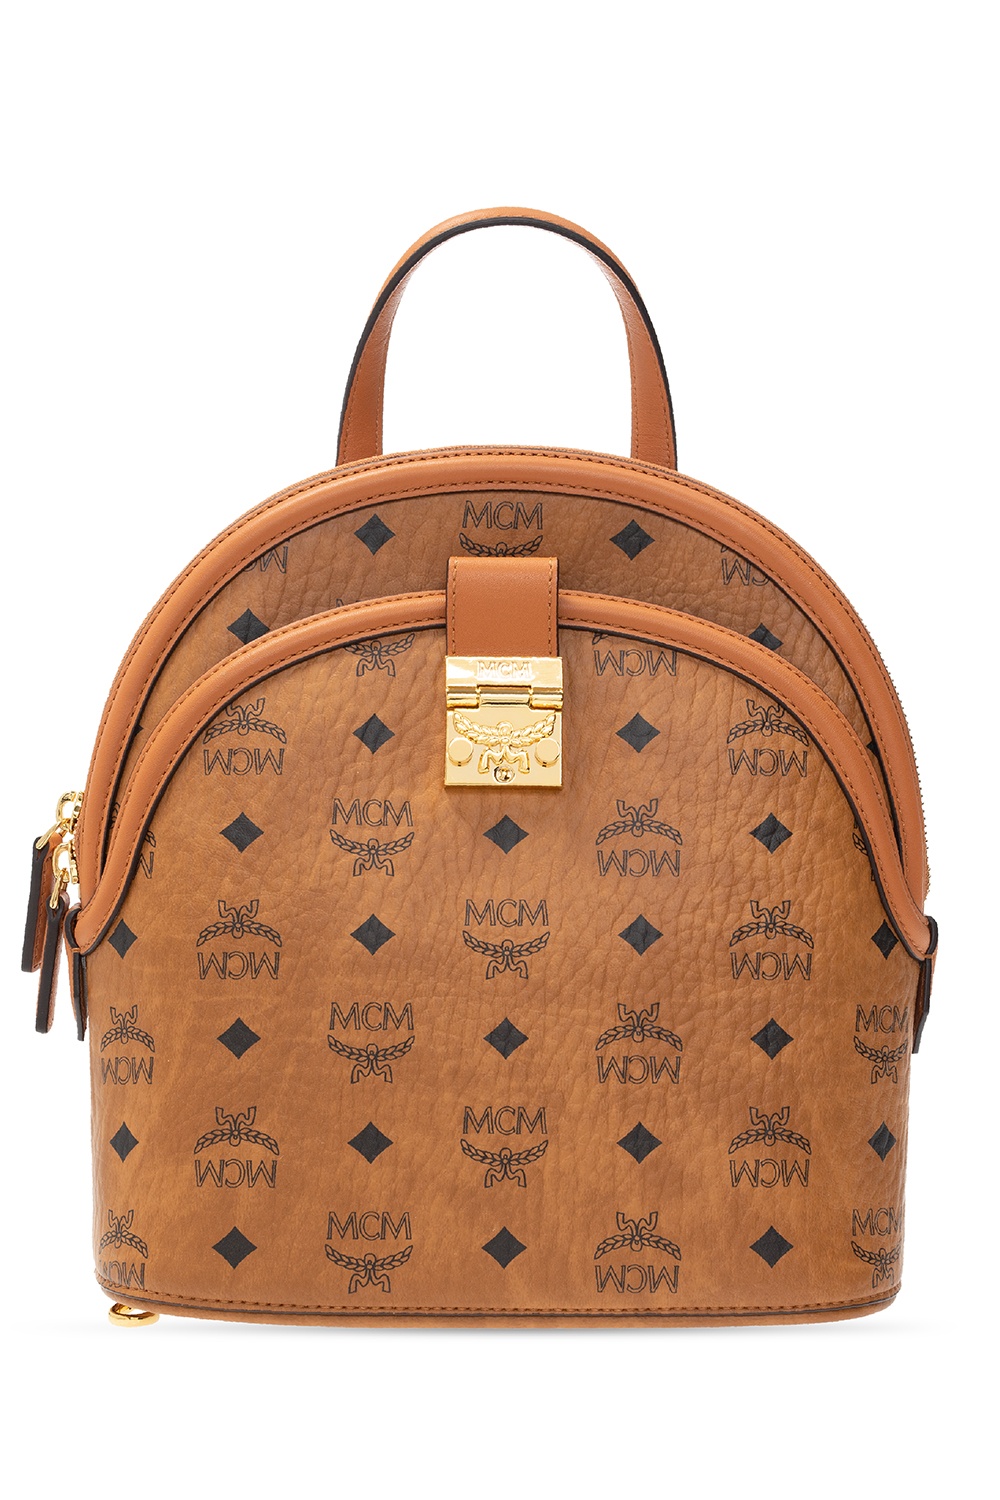 MCM Branded the backpack